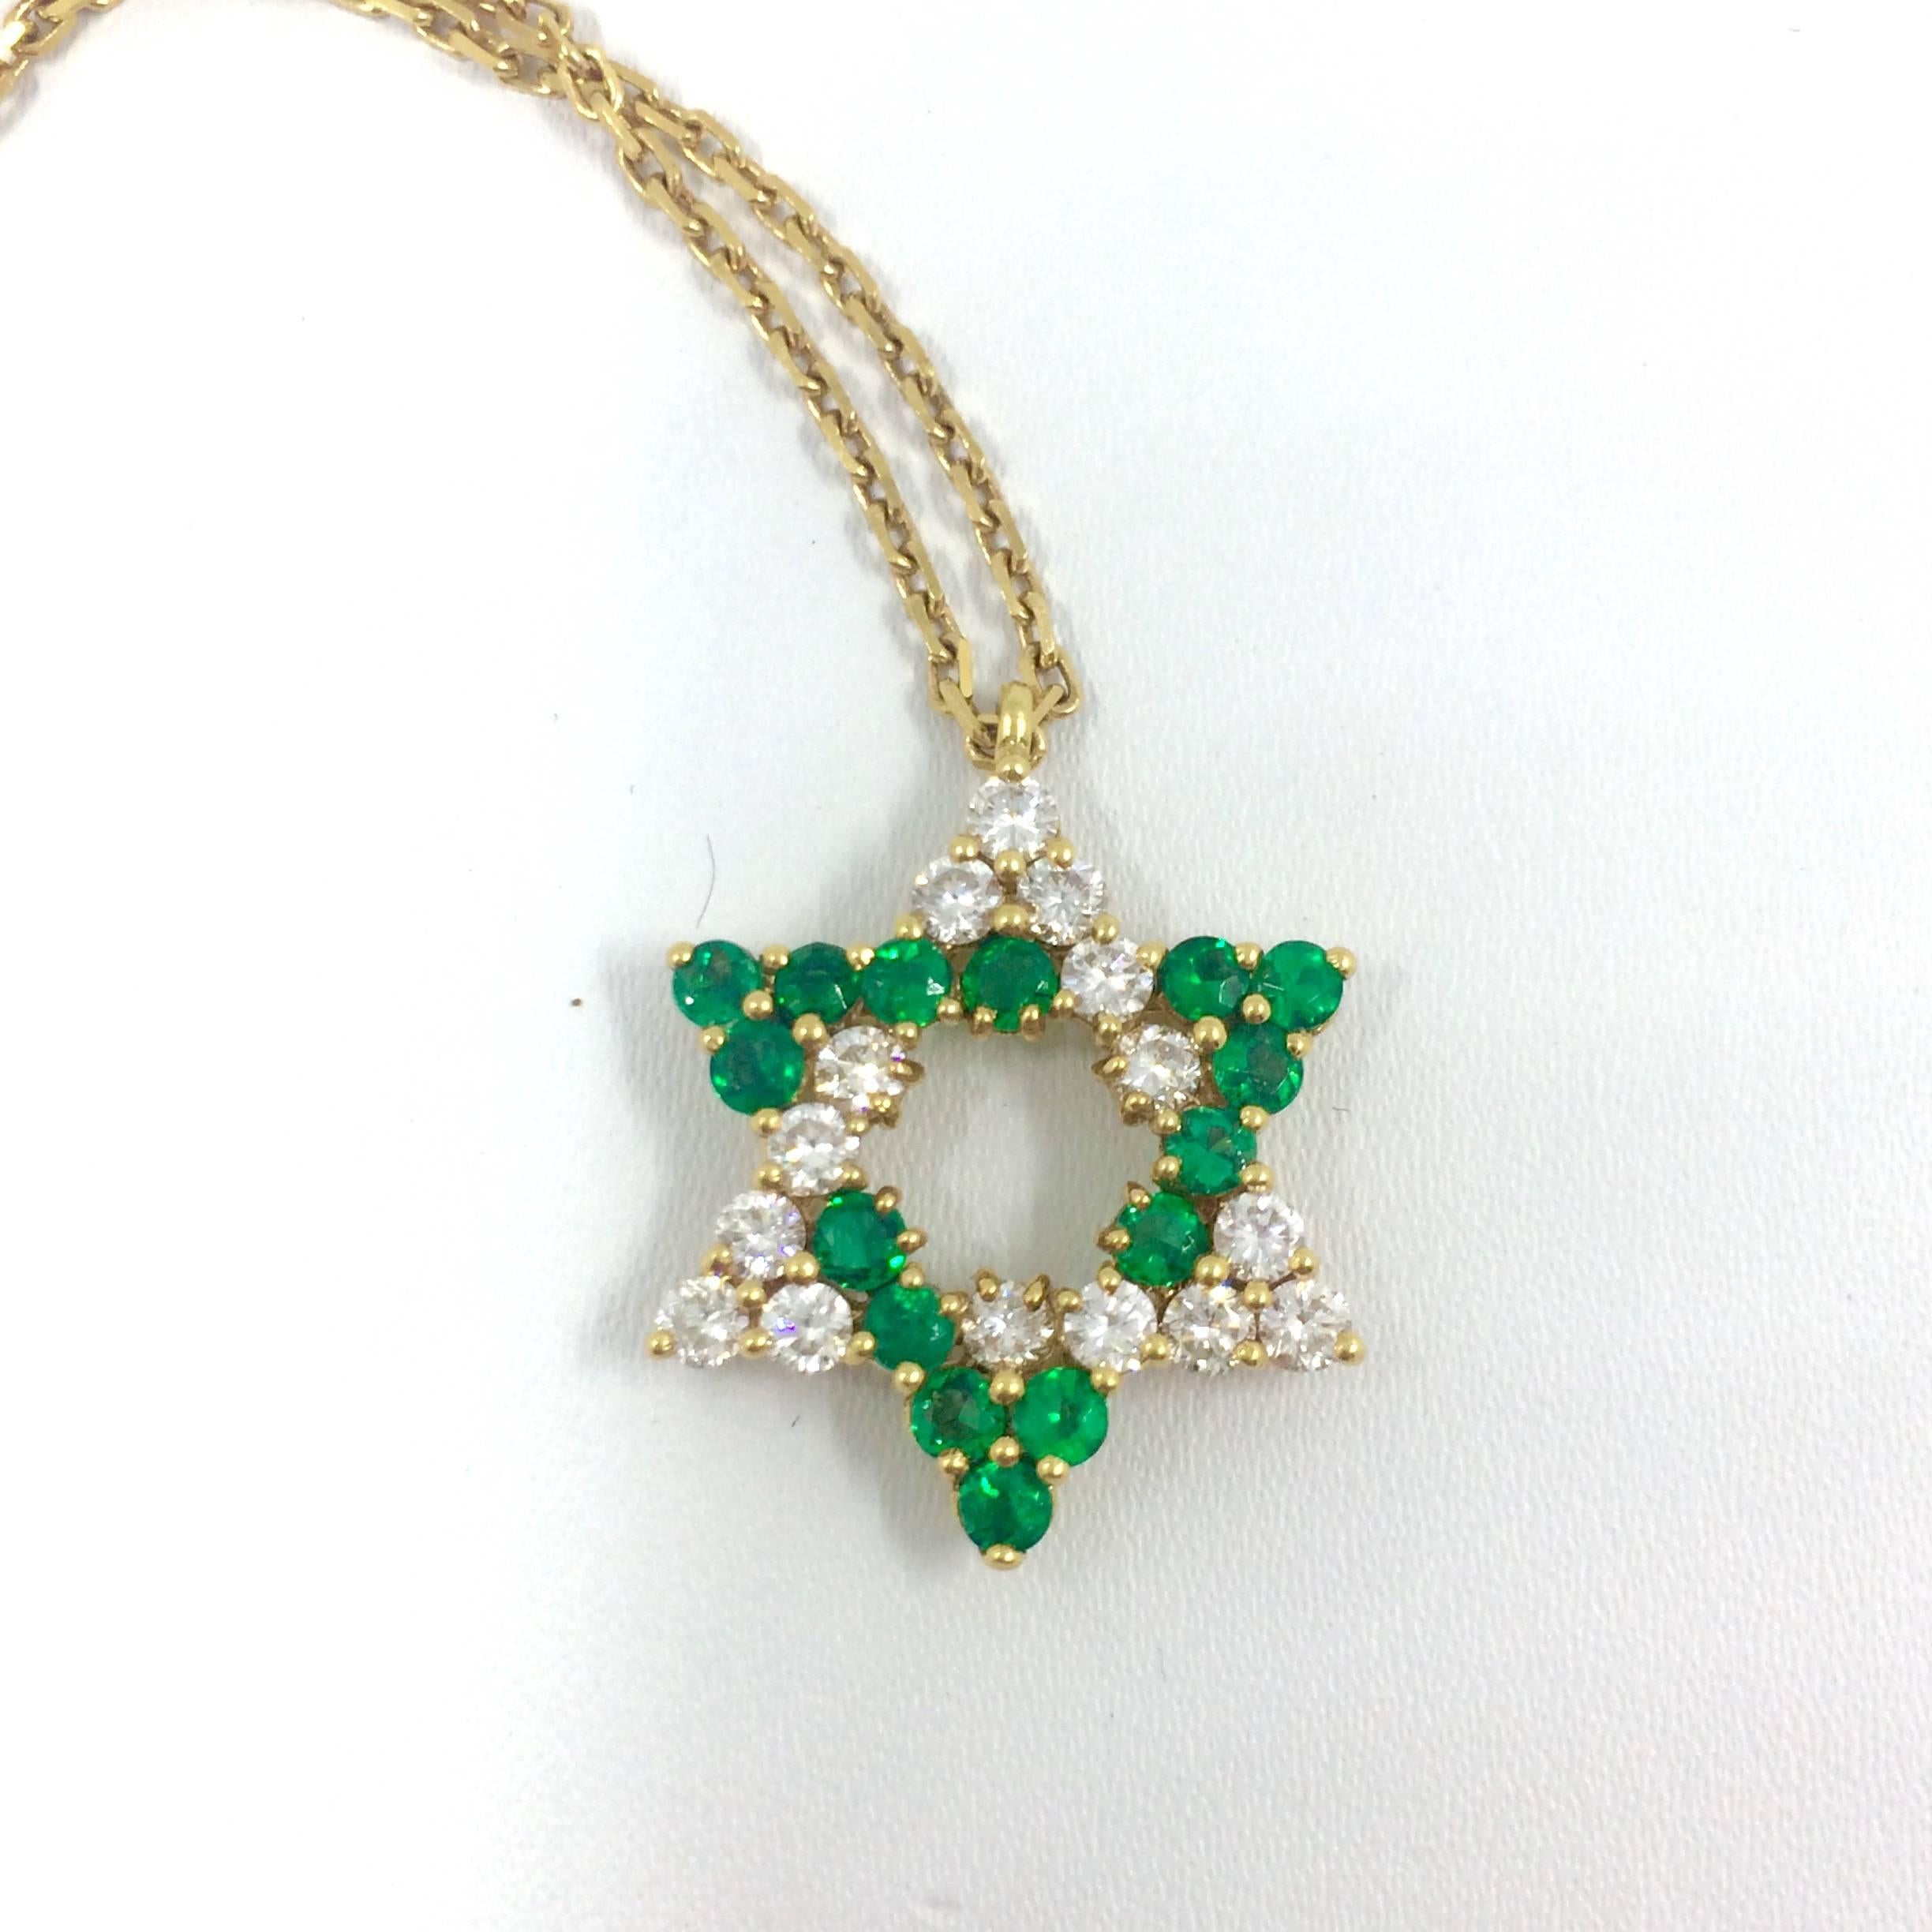 A yellow gold star of David necklace set with 15 brilliant cut emeralds and 15 brilliant cut diamonds.
Total Diamonds Weight: 0,85 carat
Total Emeralds Weight: 0,83 carat
Pendant Weight: 3,70 grams
Chain Weight: 3,60 grams
Chain Lenght: 40